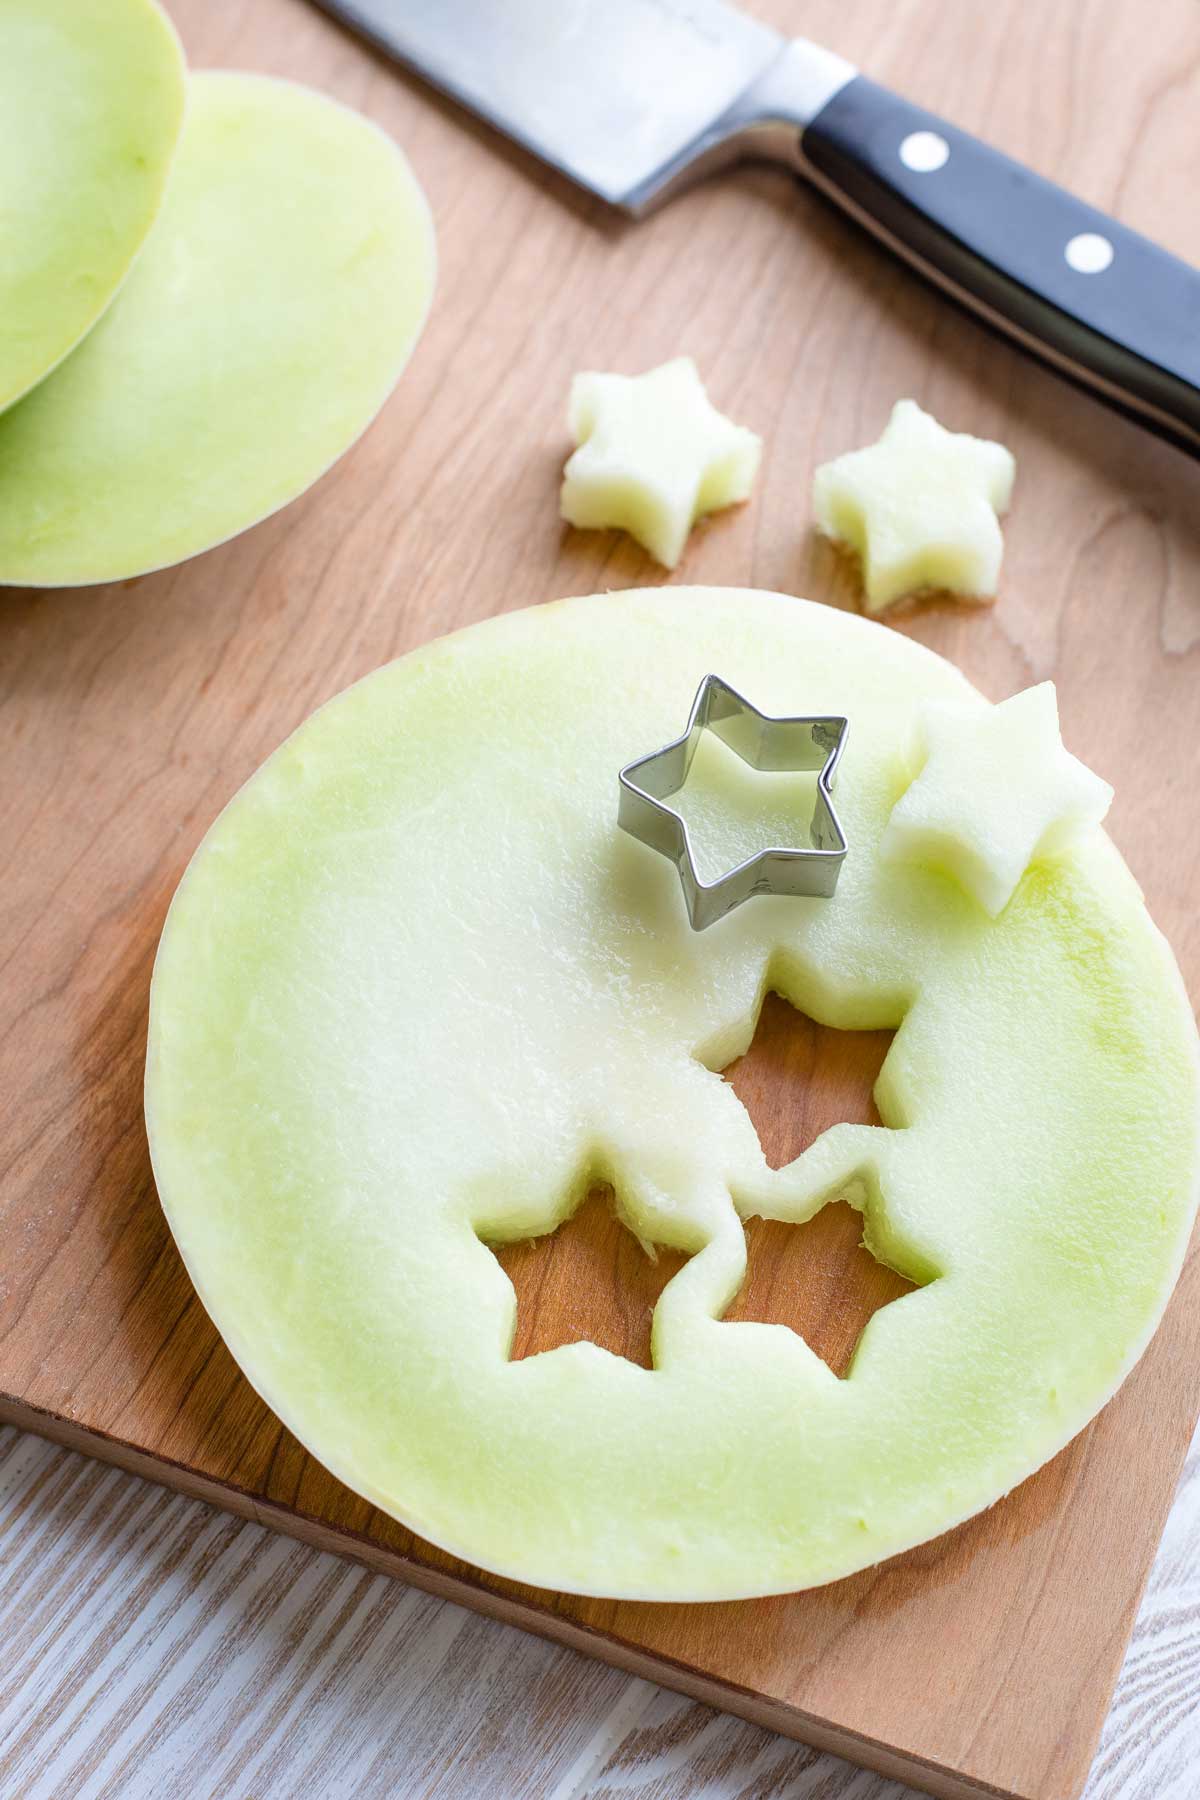 Small cookie cutter cutting stars from a plank of green honeydew melon.